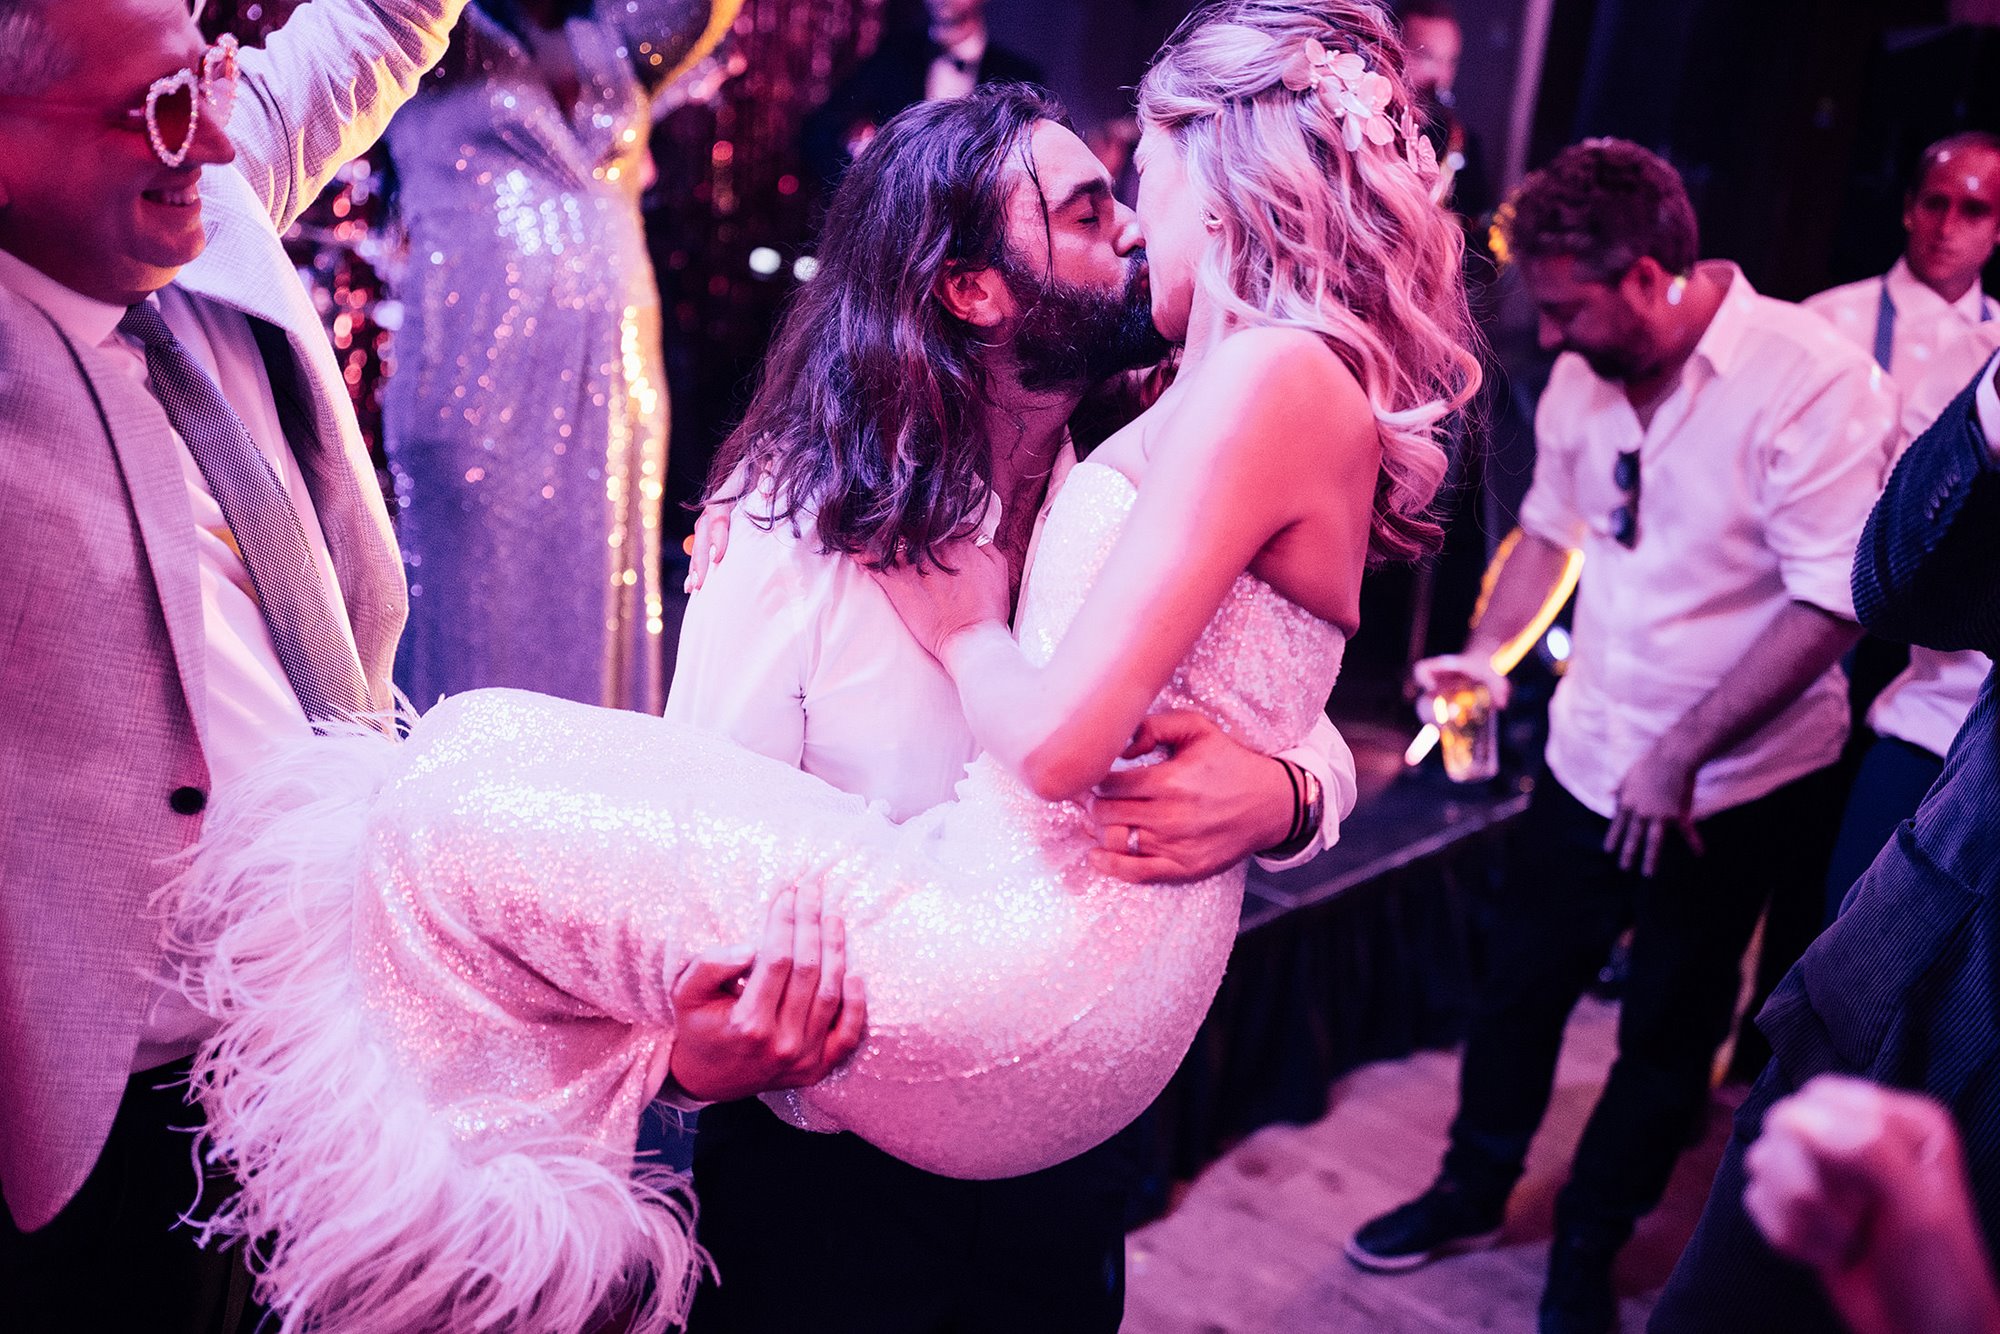 Groom carrying his bride while they kiss on the dance floor of their wedding reception in a soft pink glowing light